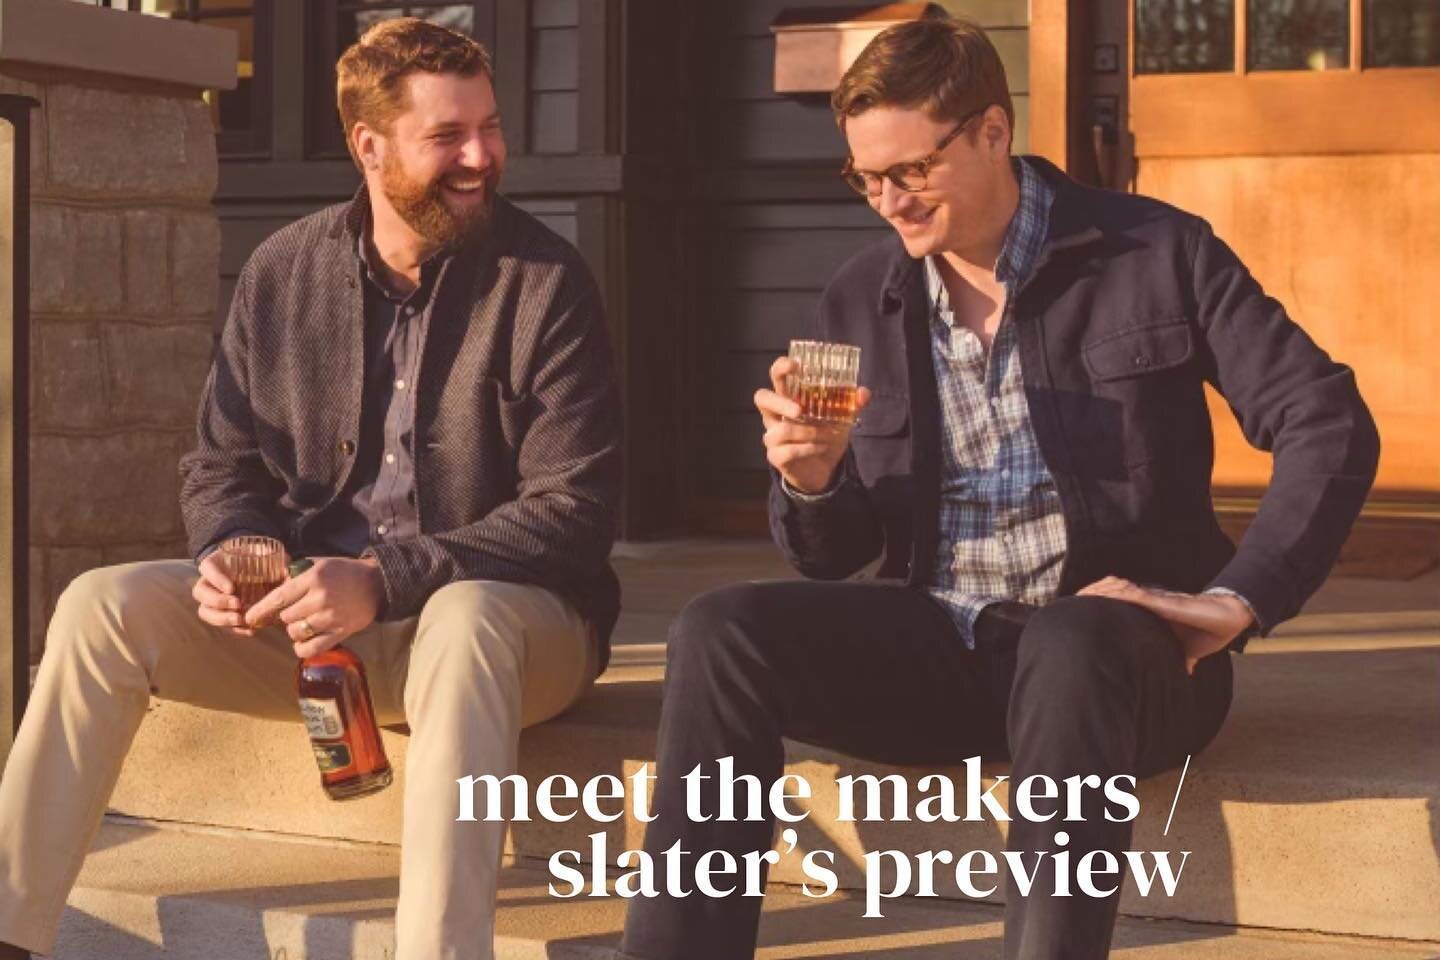 This Thursday! 👀 October 13th at 6pm, special sneak preview of Slater&rsquo;s and meet the brothers behind Nelson Brothers Distillery, Andy and Charlie Nelson! We&rsquo;re selling a limited amount of tickets to this whiskey tasting and preview(link 